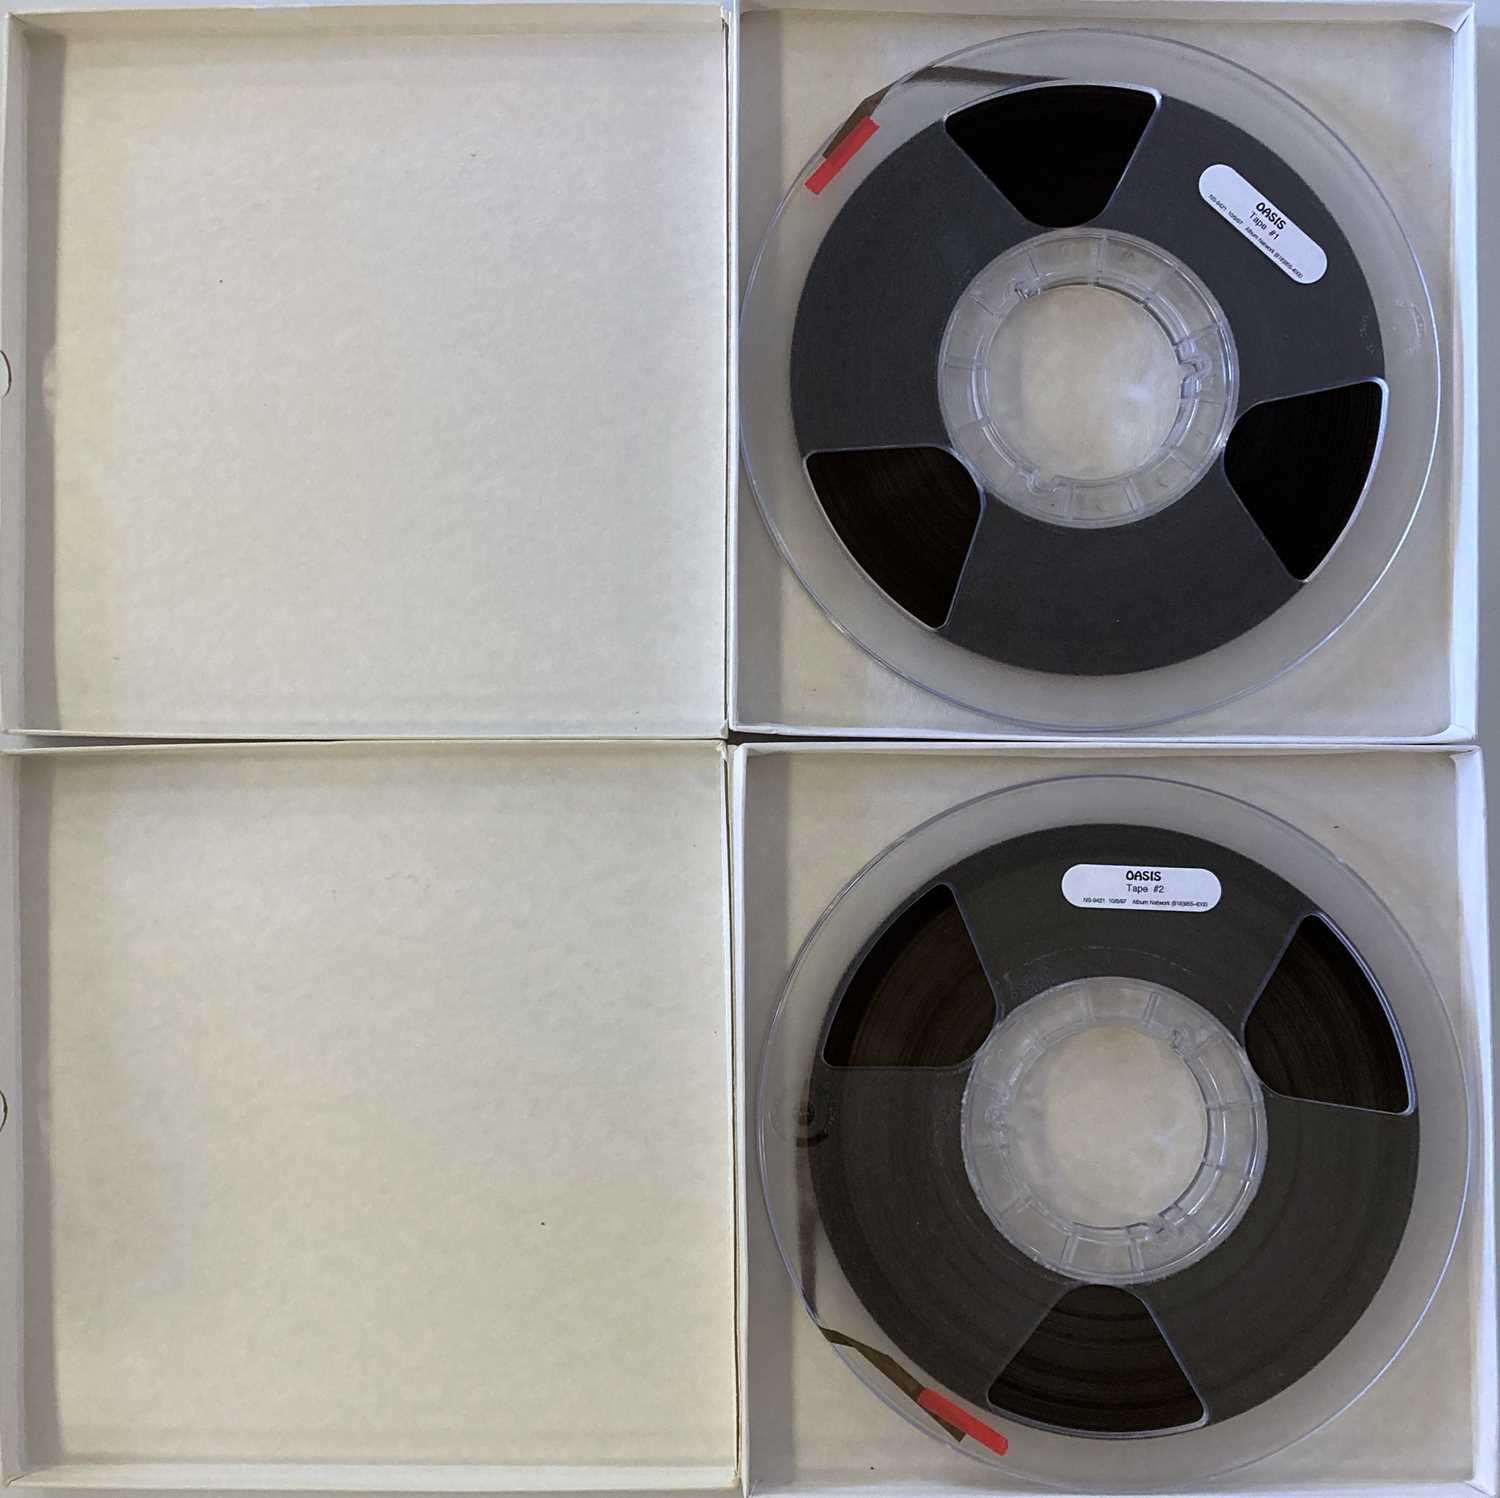 OASIS - 1997 BE HERE NOW CONCERT TAPE REELS. - Image 2 of 2